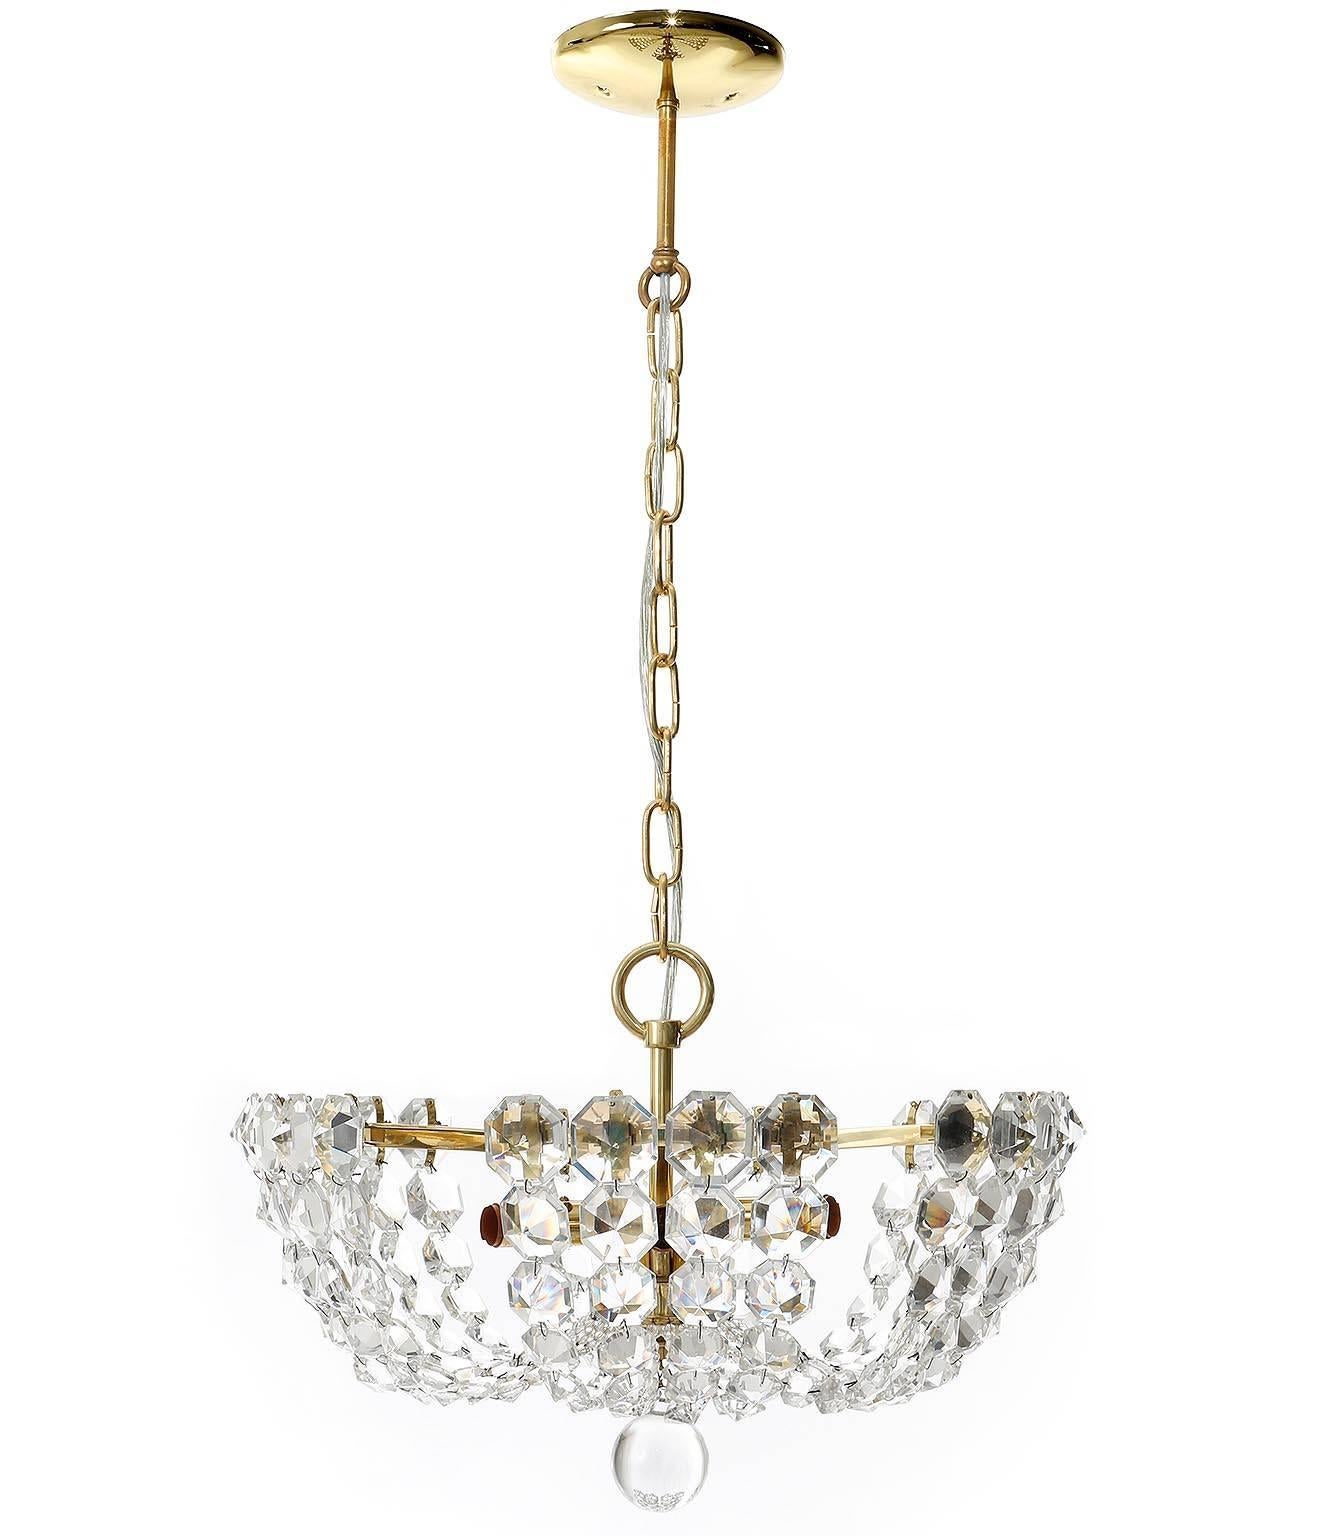 A beautiful and unusual basket light fixture by J.L. Lobmeyr, Vienna, Austria, manufactured in Mid-Century, circa 1960 (end of 1950s and beginning of 1960s).
It is made of brass and hand cut diamond shaped crystal glass. Outstanding workmanship, a